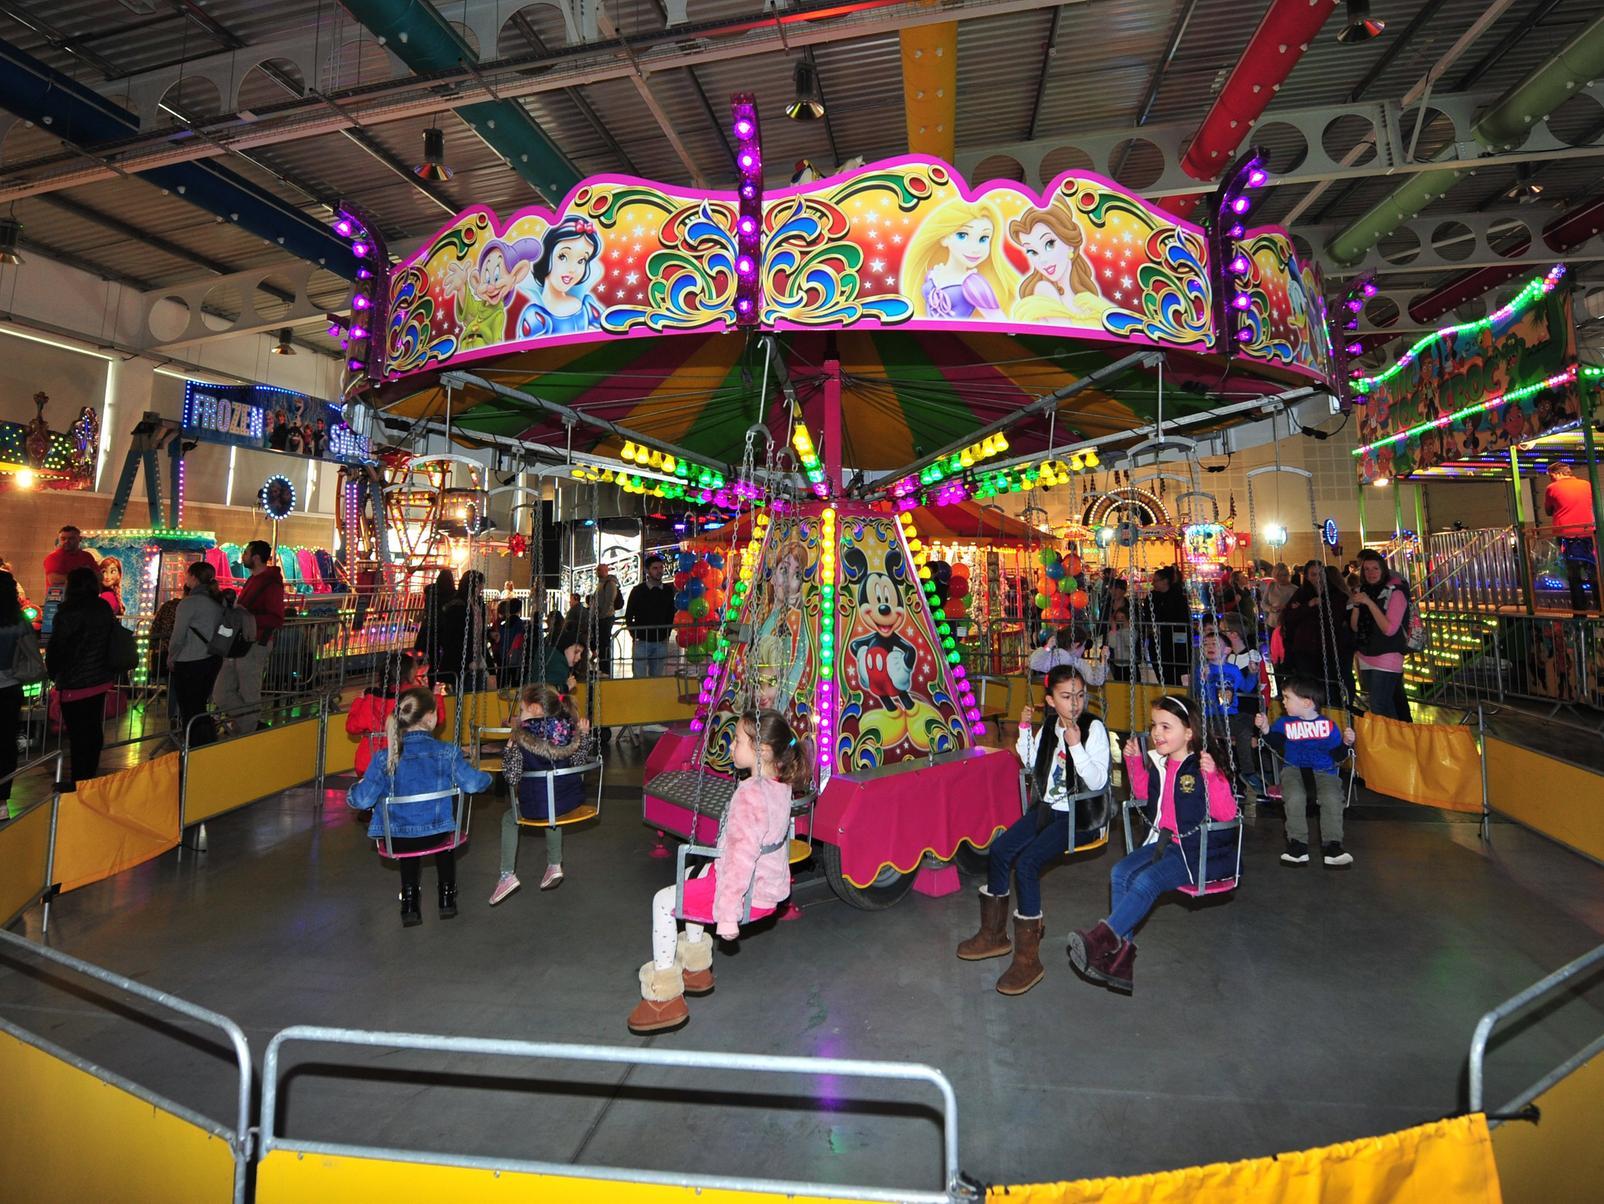 The Indoor Funfair returns to the Yorkshire Event Centre this February half term. It operates in three hour sessions - from 10am-1pm and 2pm-5pm, costs 10 for as many rides as you want and is open until Sunday, February 23.